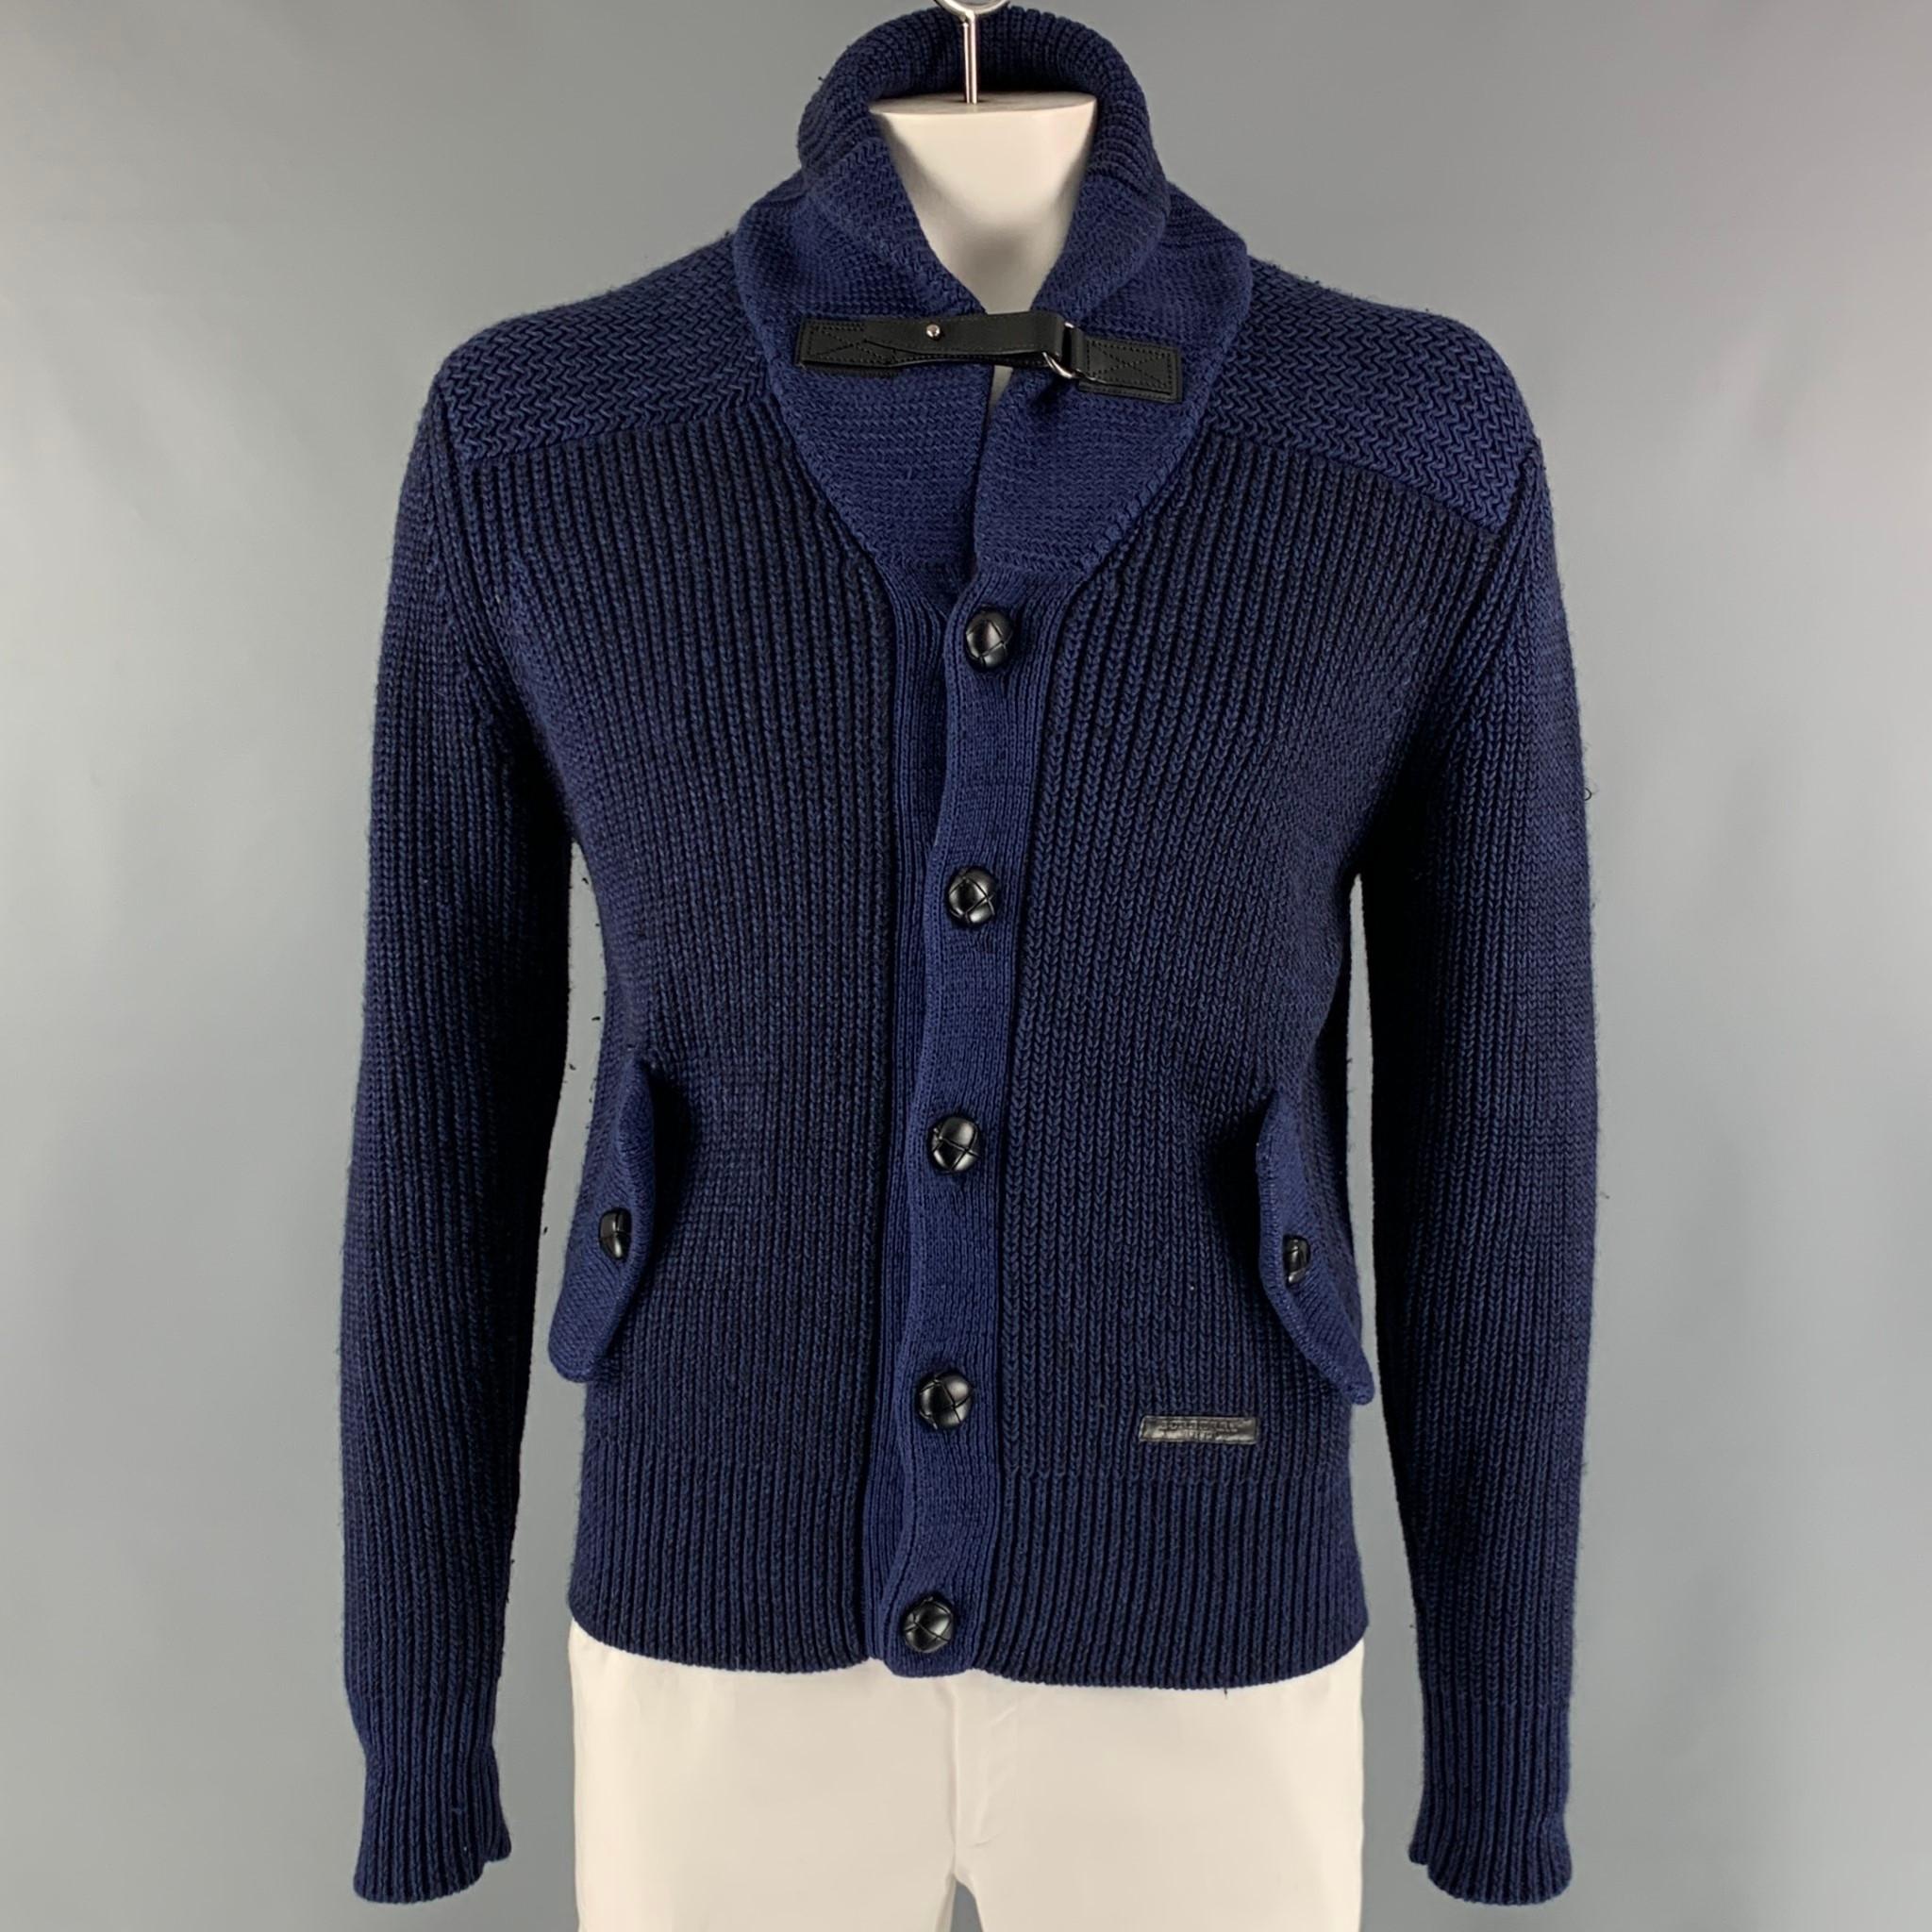 BURBERRY BRIT cardigan sweater come in a blue linen blend knitted material featuring a black wooden buttons closure, front flap pockets, and a shawl collar. Made in Italy.

Very Good Pre-Owned Condition. Moderate Piling.
Marked: